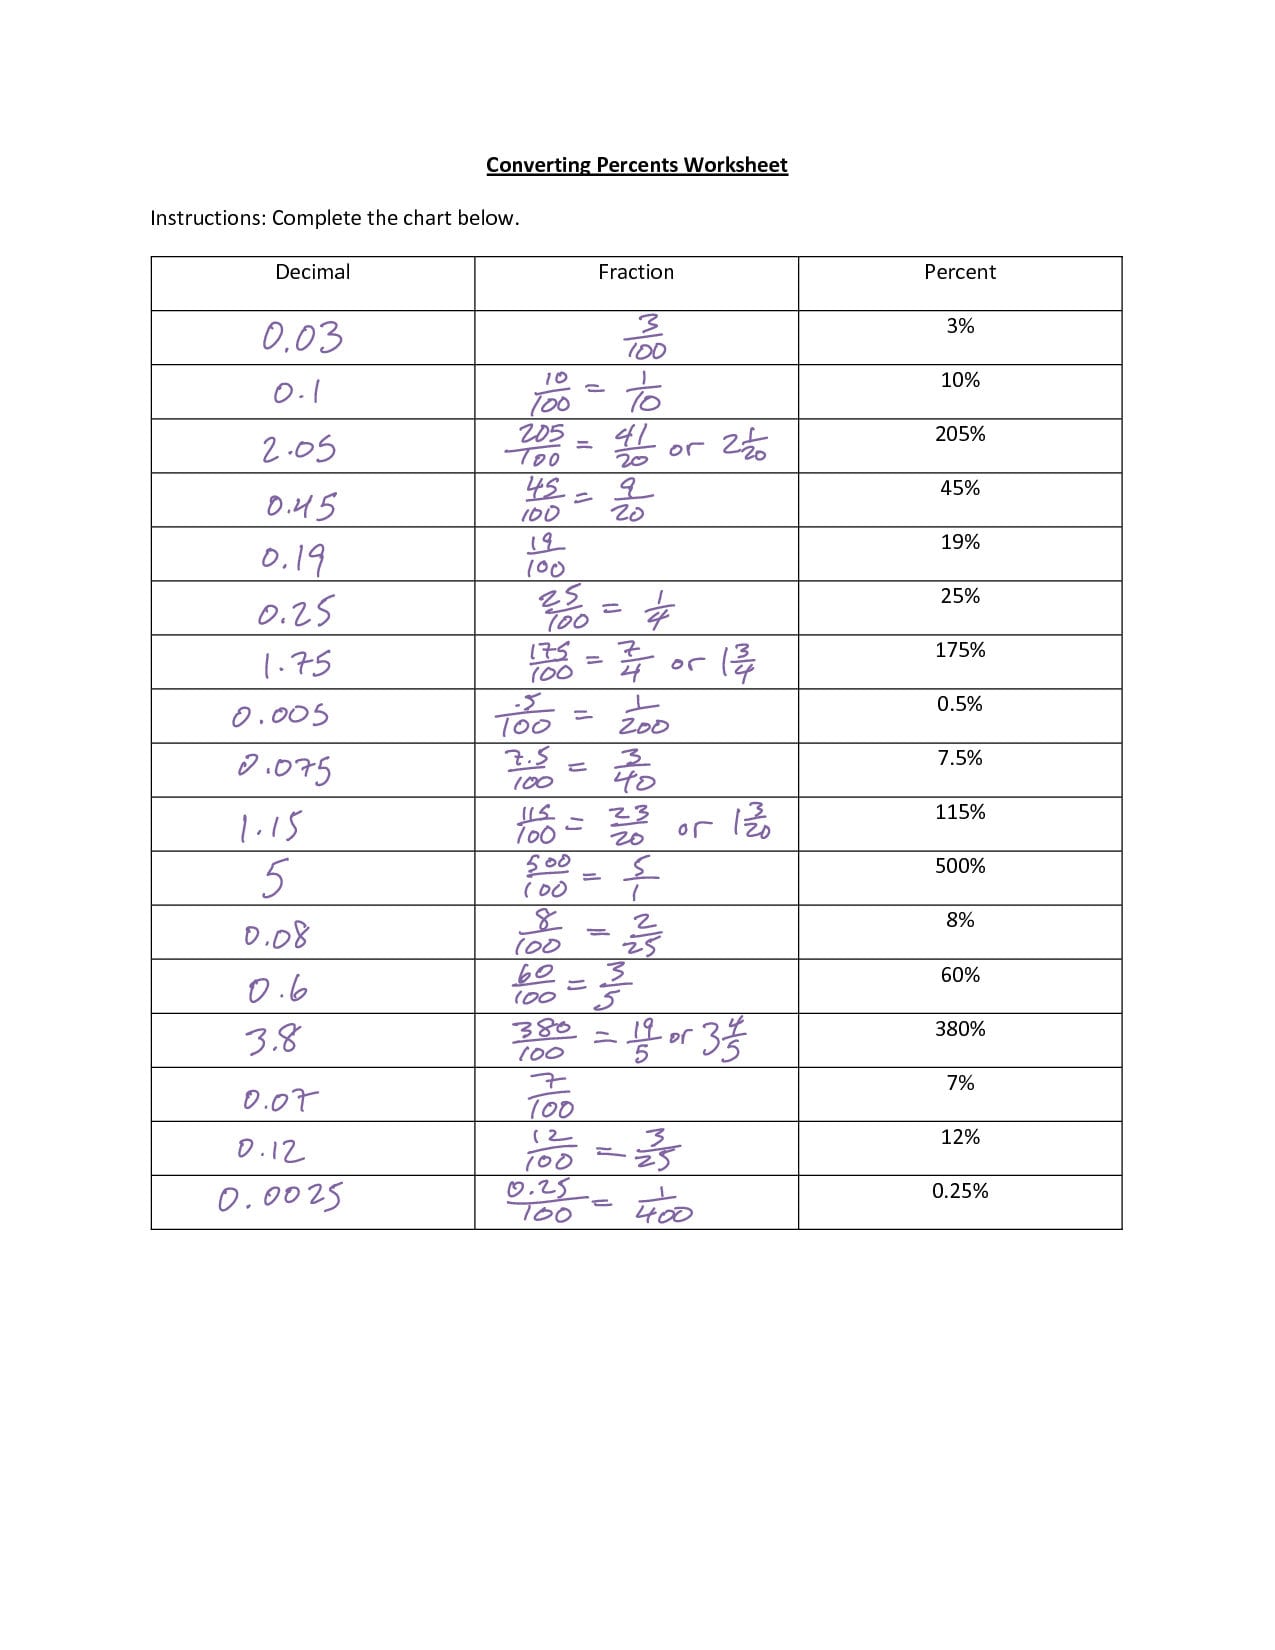 Remarkable How To Convert Fractions Decimals And Percents Worksheets Inside Converting Fractions Decimals And Percents Worksheets